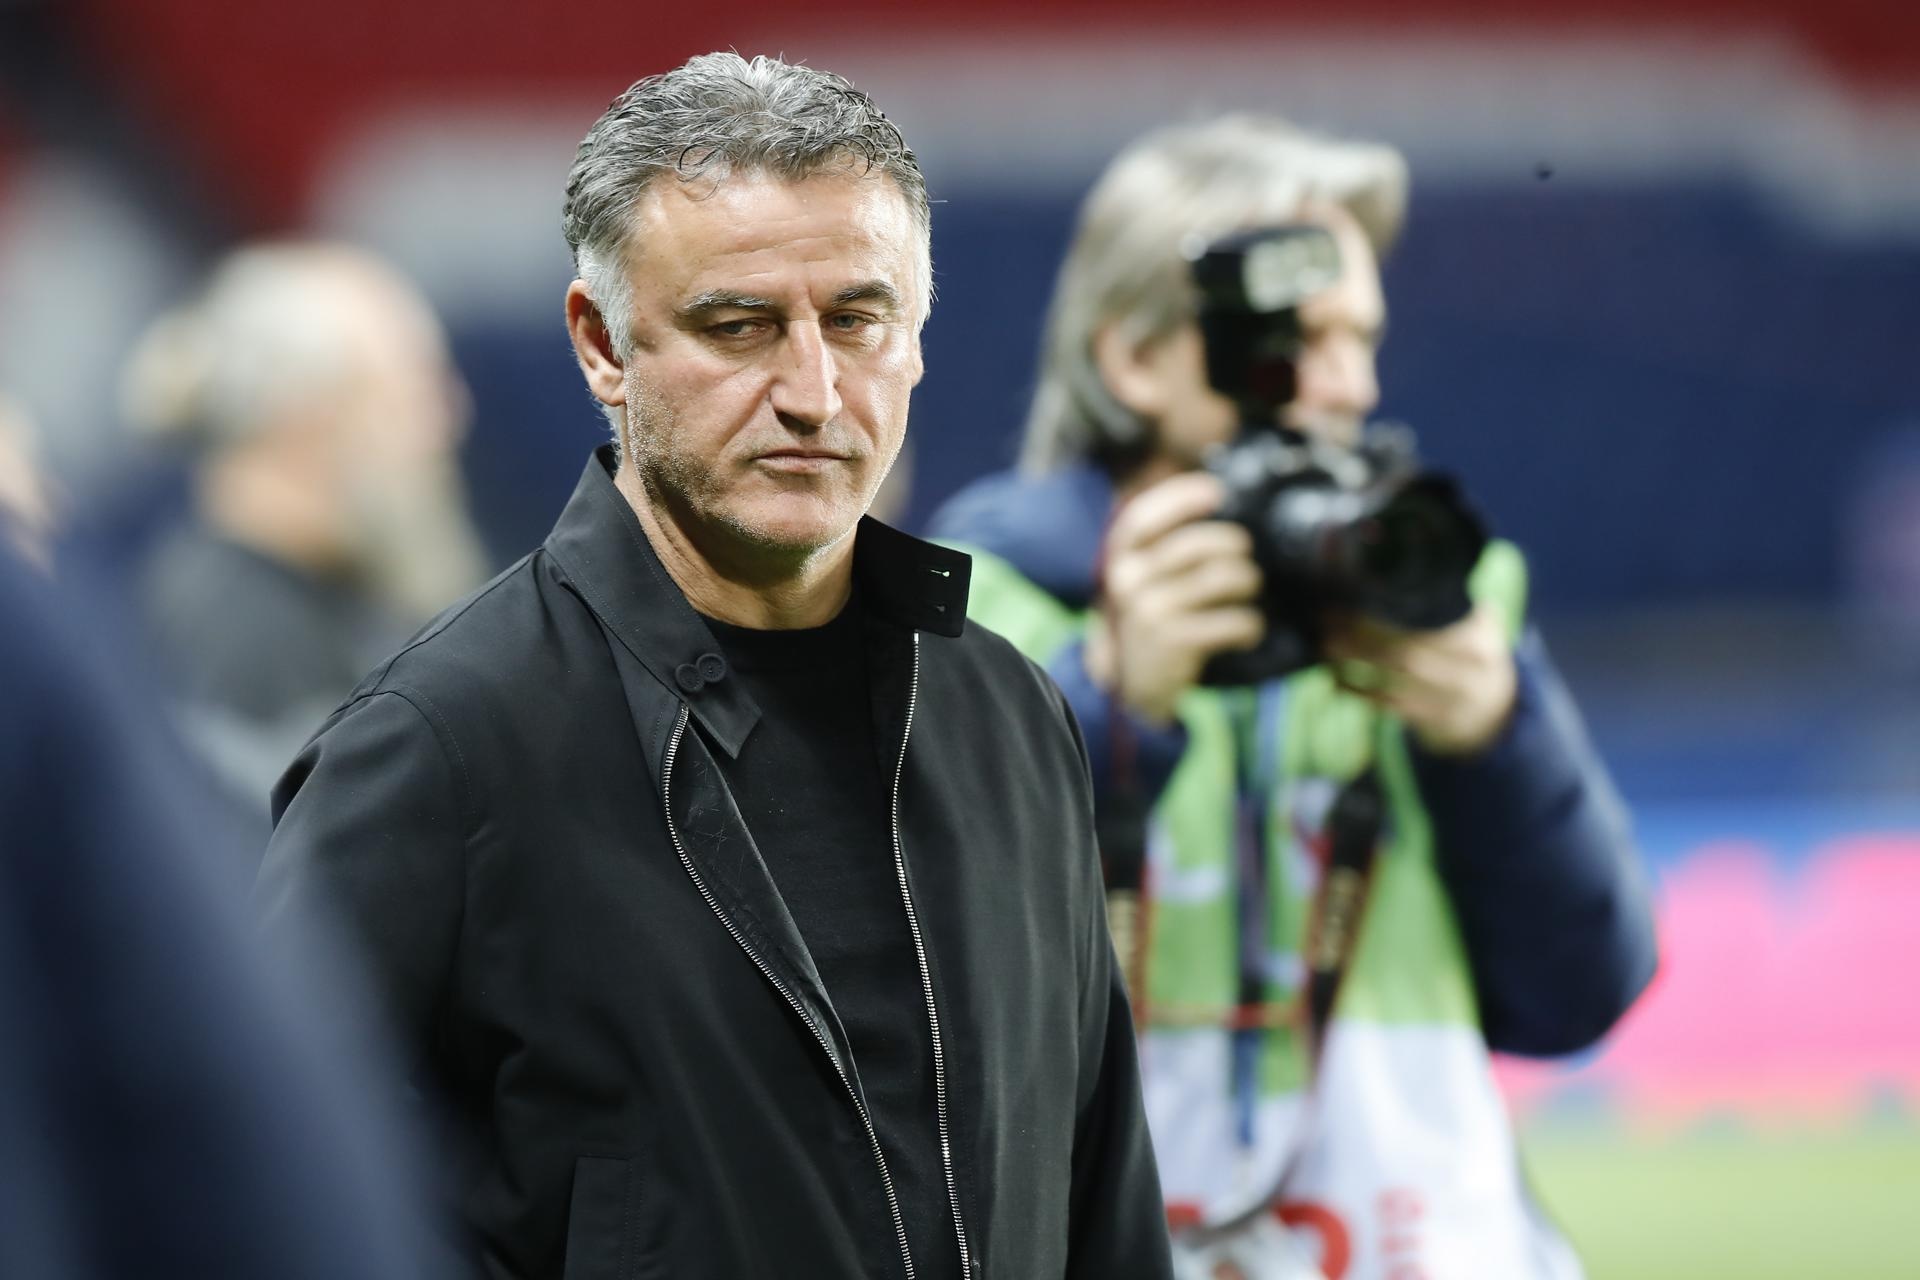 PSG will have to pay Galtier €6m if they decide to sack him. EFE